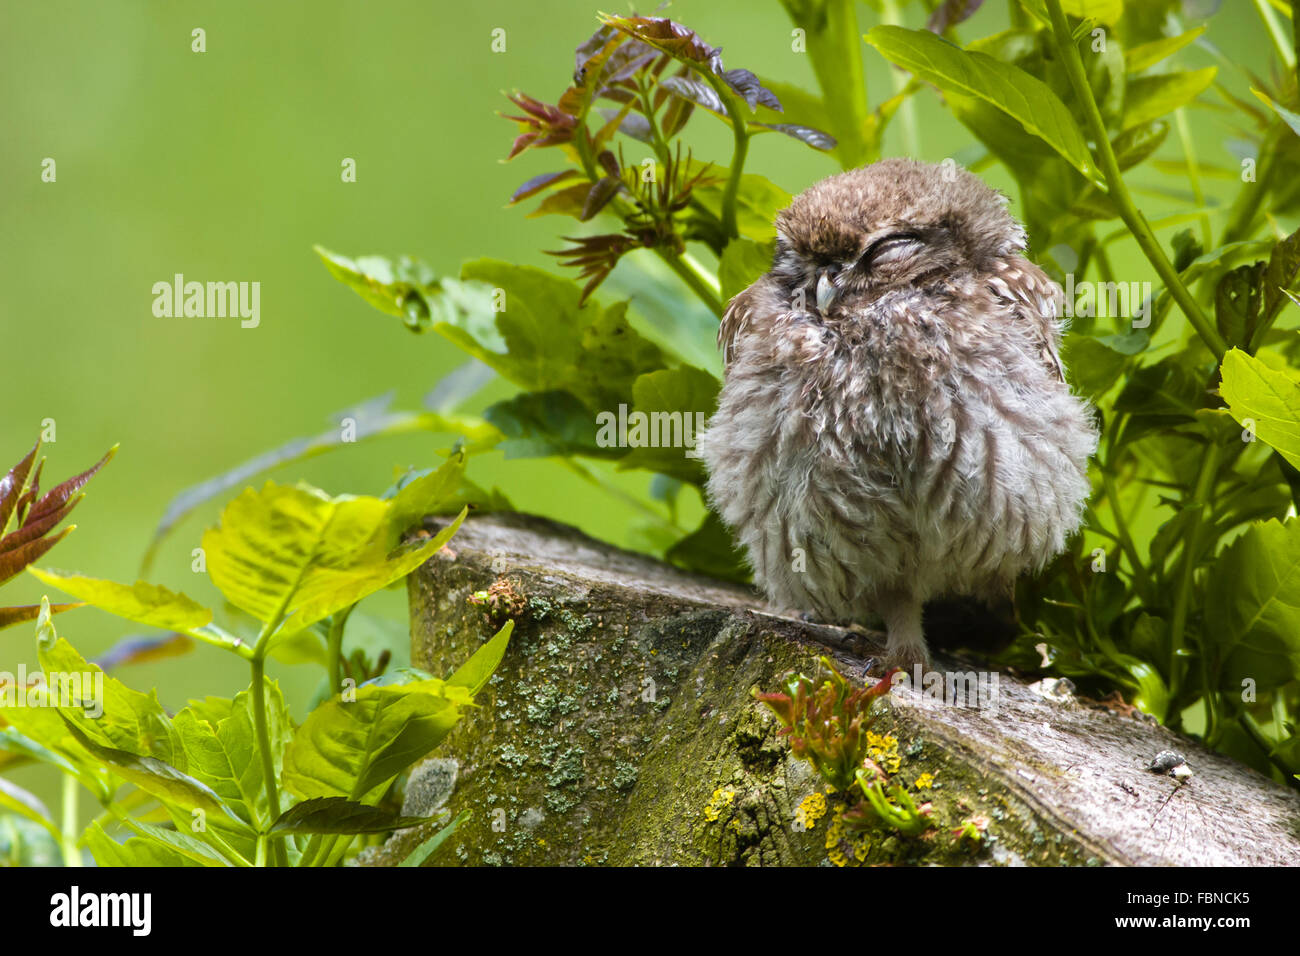 Young little owl [Athene noctua] chick sleeping perched on a tree stump. Stock Photo